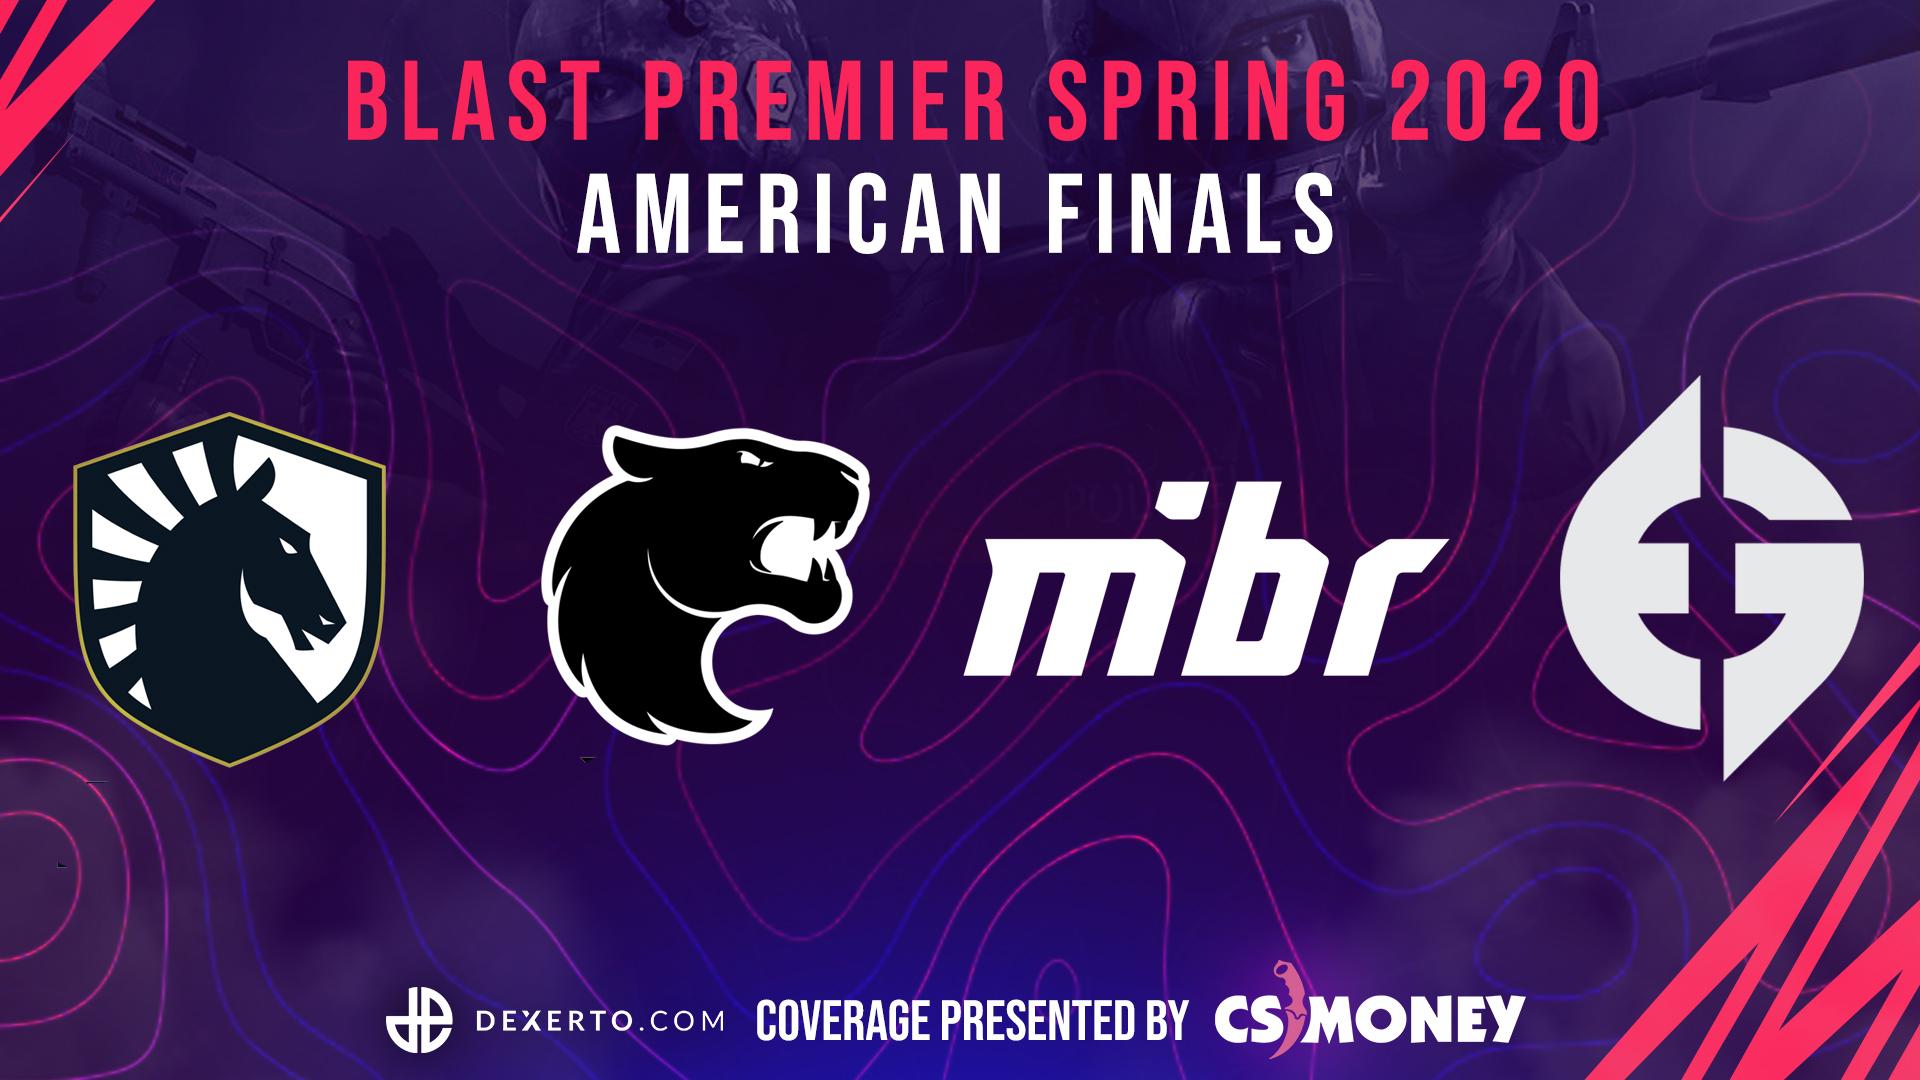 American Finalists for the BLAST Premier Spring Finals.